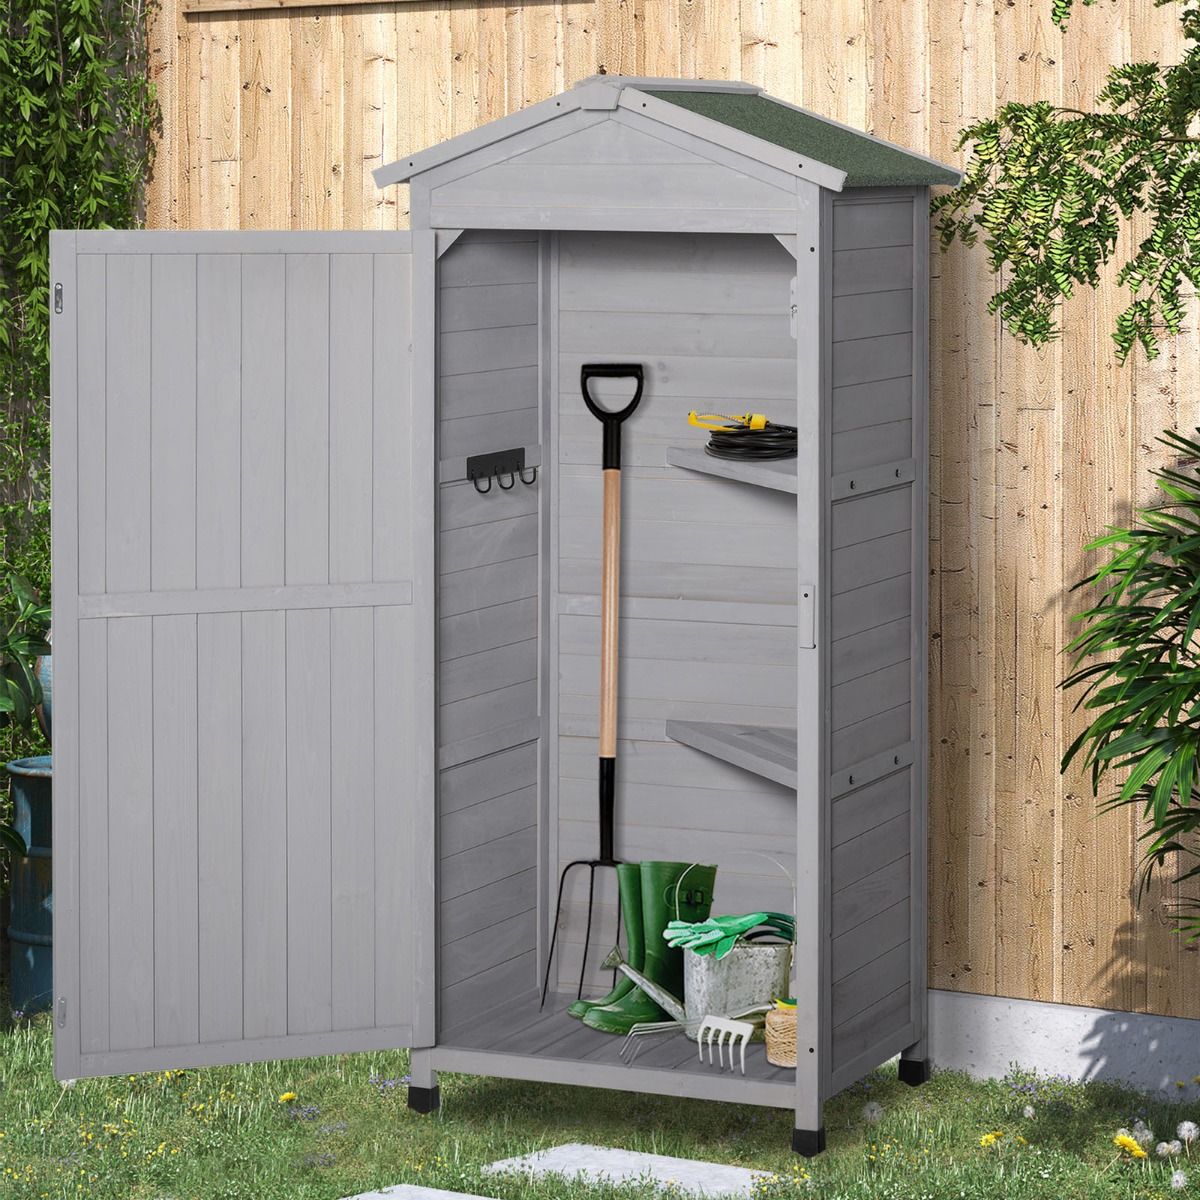 Outsunny Wooden Garden Storage Shed Cabinet, Grey - Tall